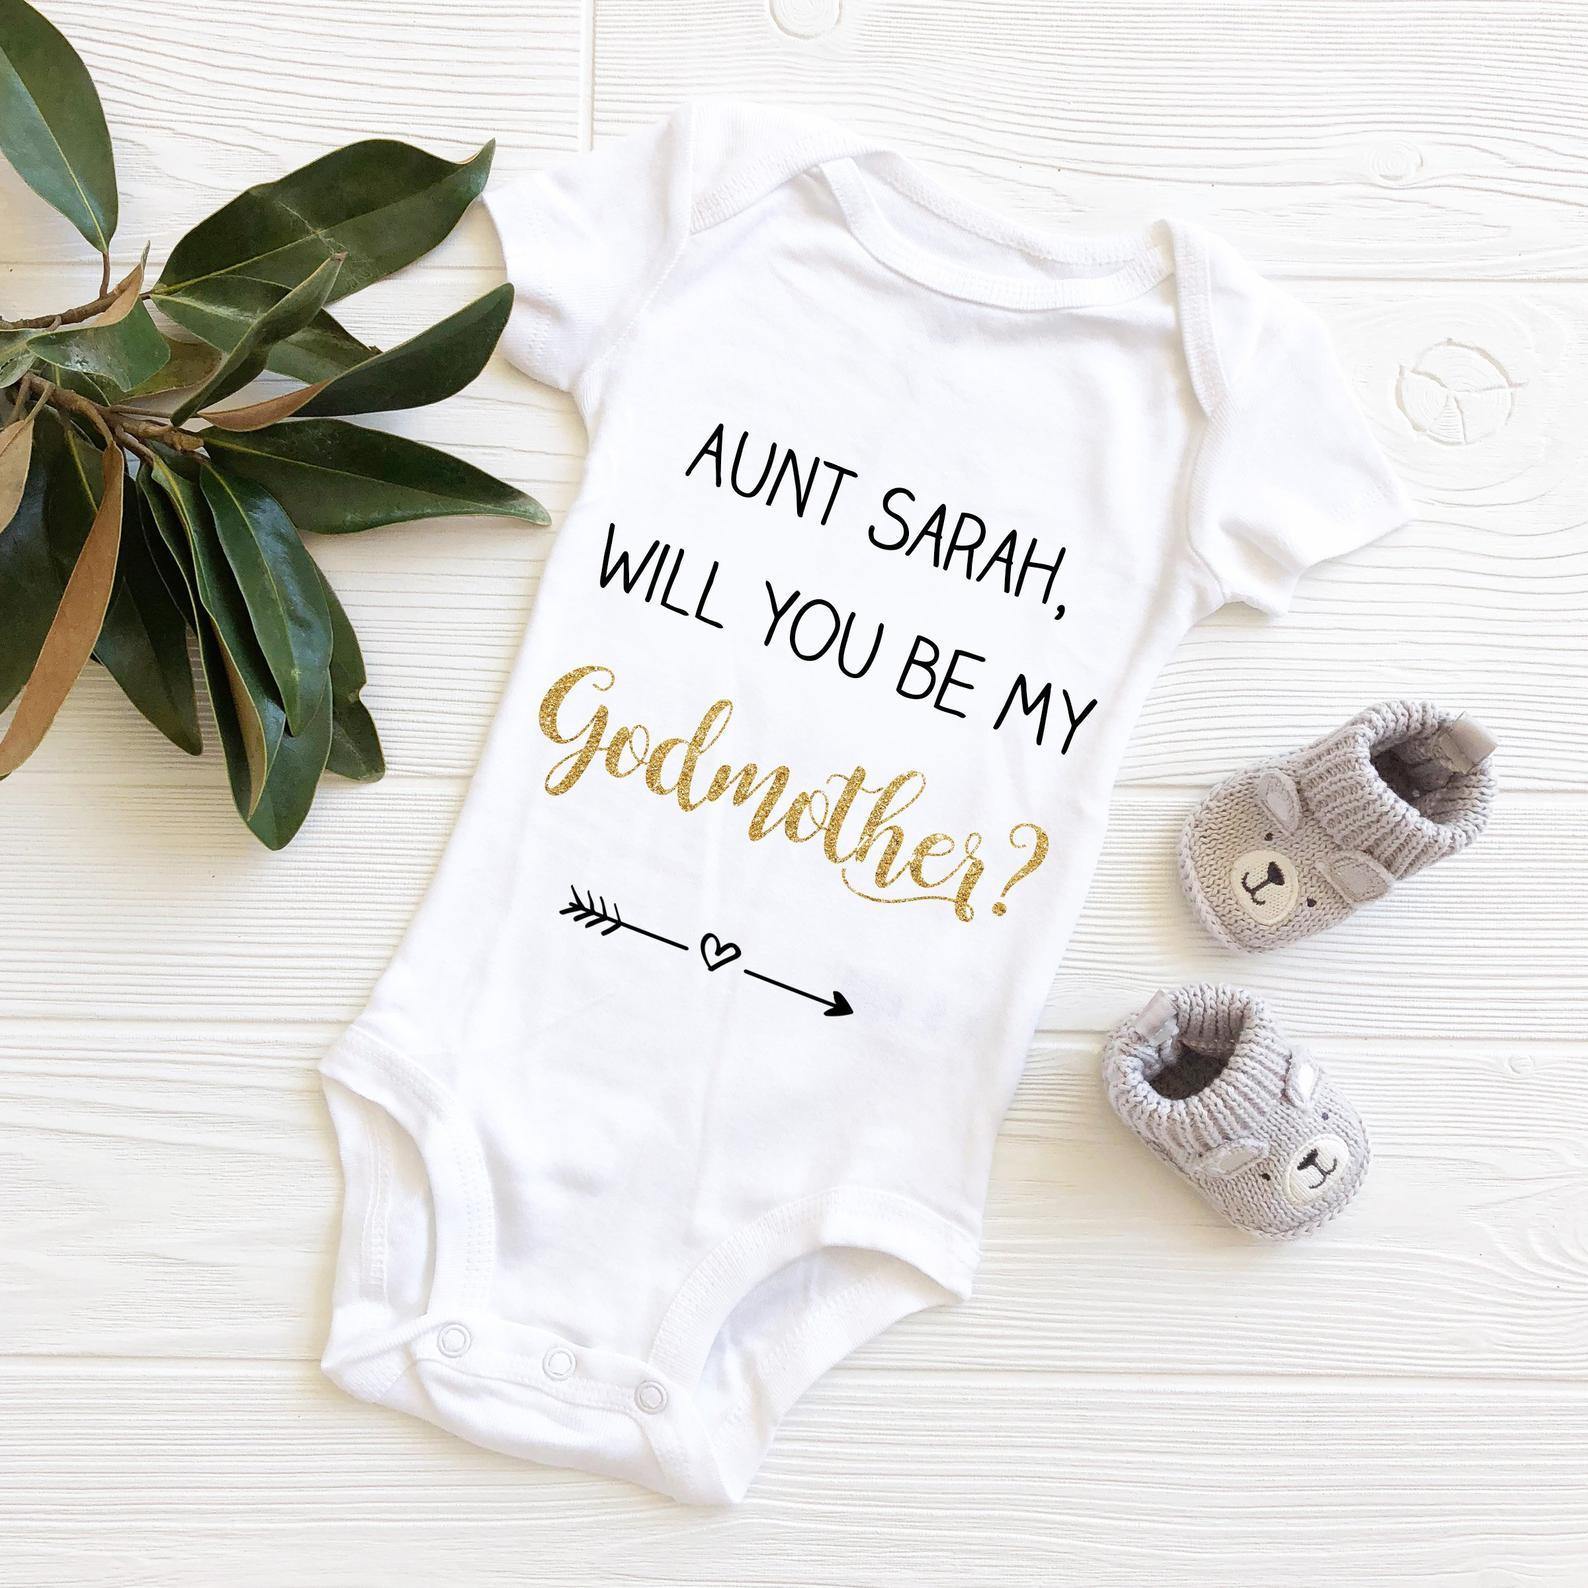 Will you be my godmother babygrow? - Robes 4 You